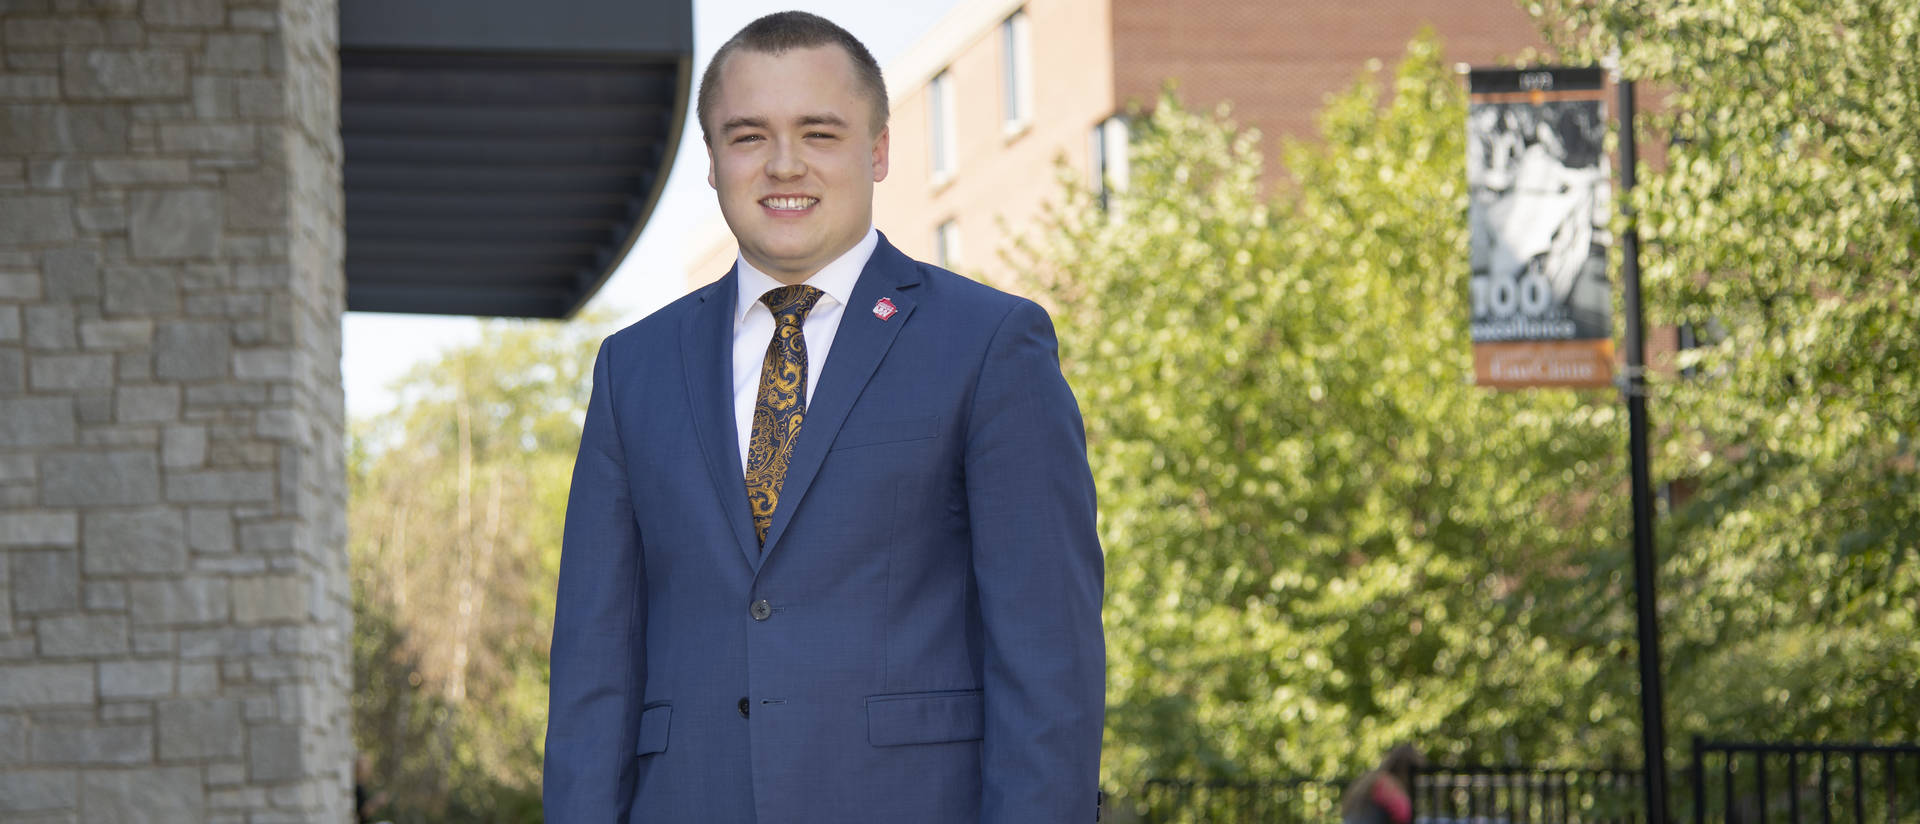 Senior Ryan Ring is in his second year as a student representative on the UW System Board of Regents.